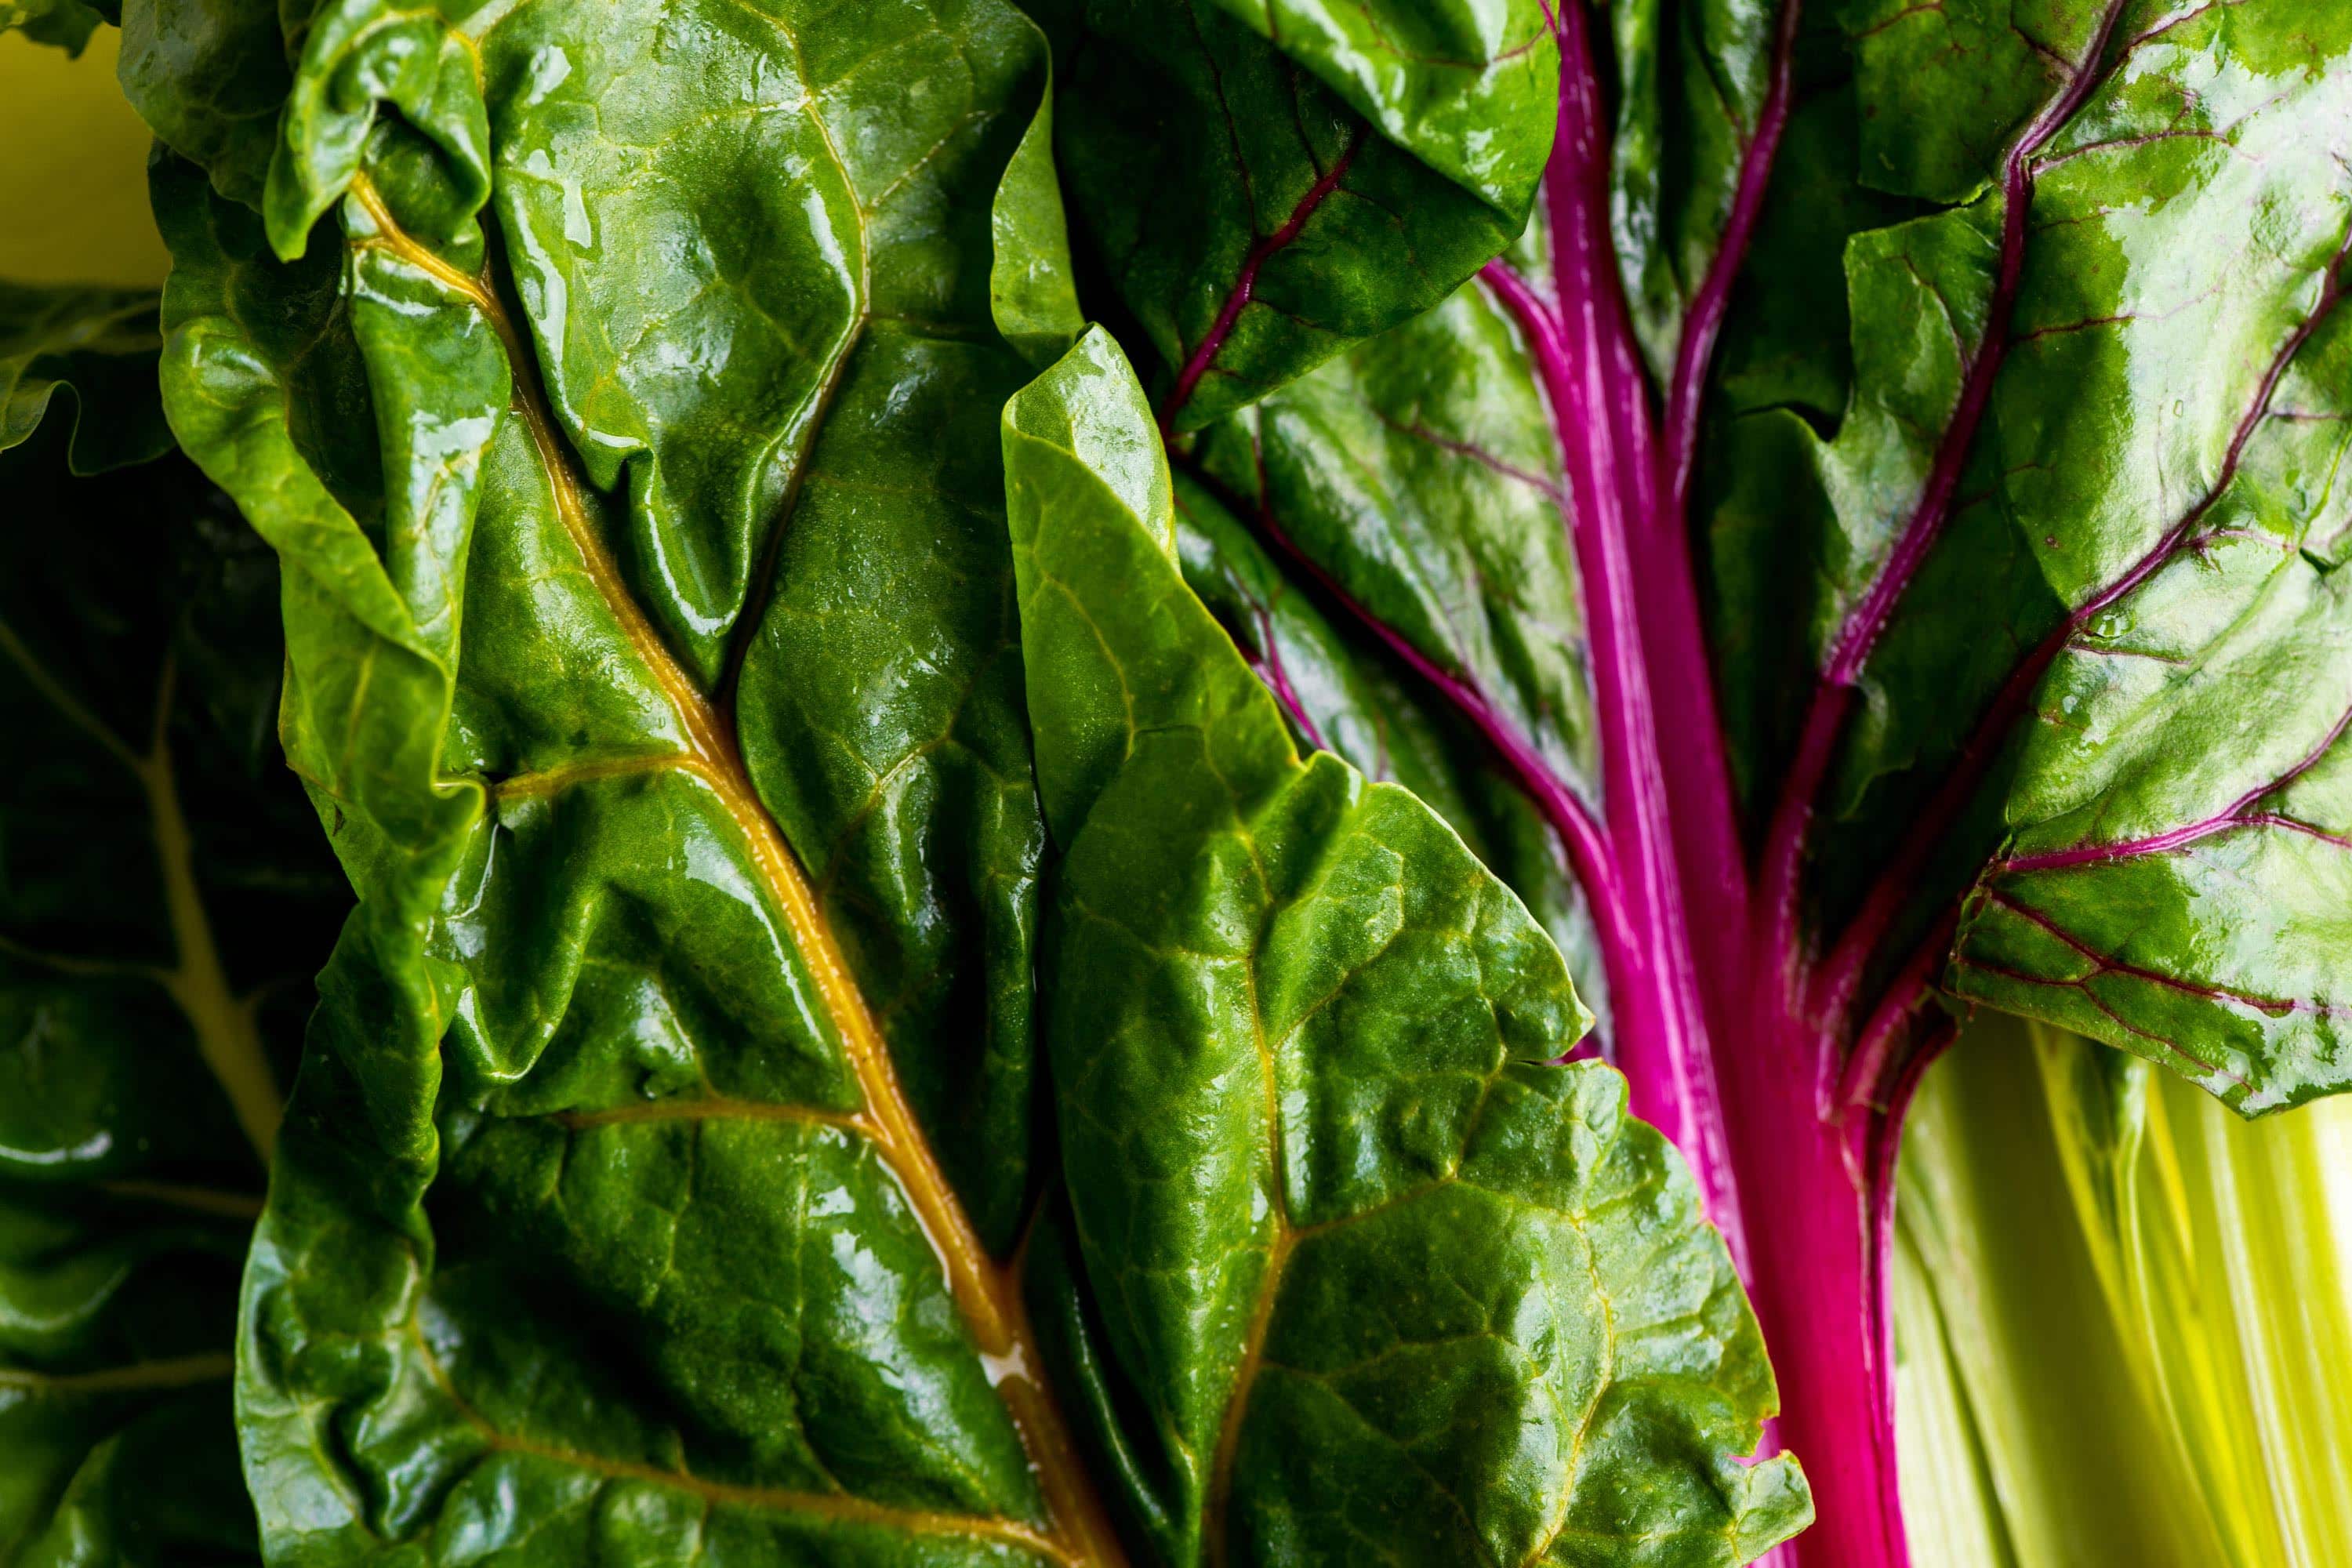 How To Cook Swiss Chard Swiss Chard Recipes The Mom 100